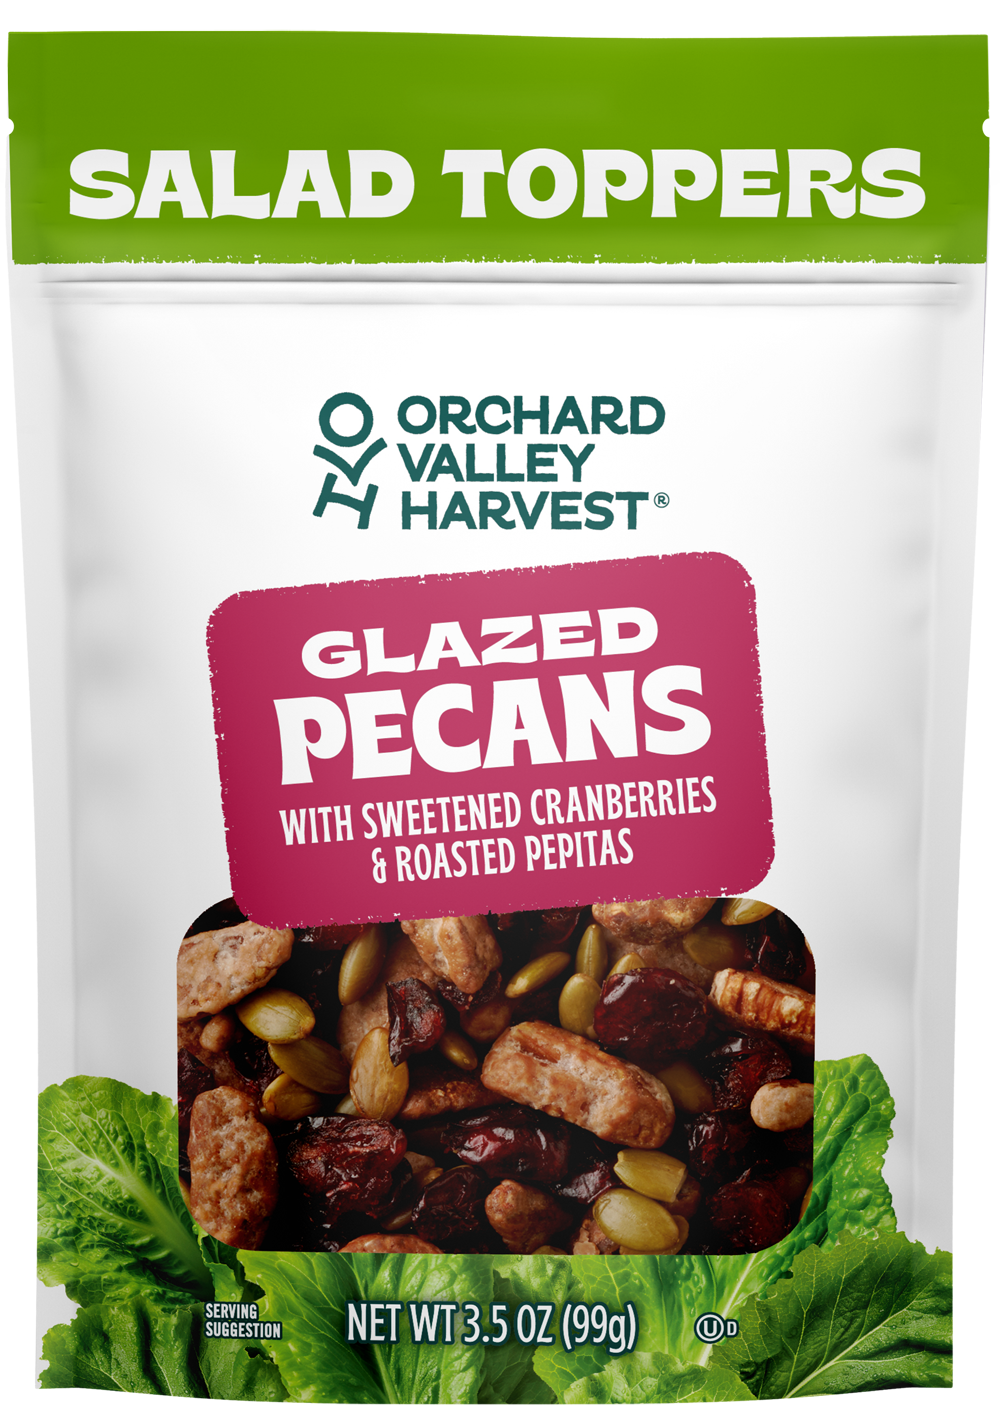 Glazed Pecans With Sweetened Cranberries & Pepitas – Stand Up Bag